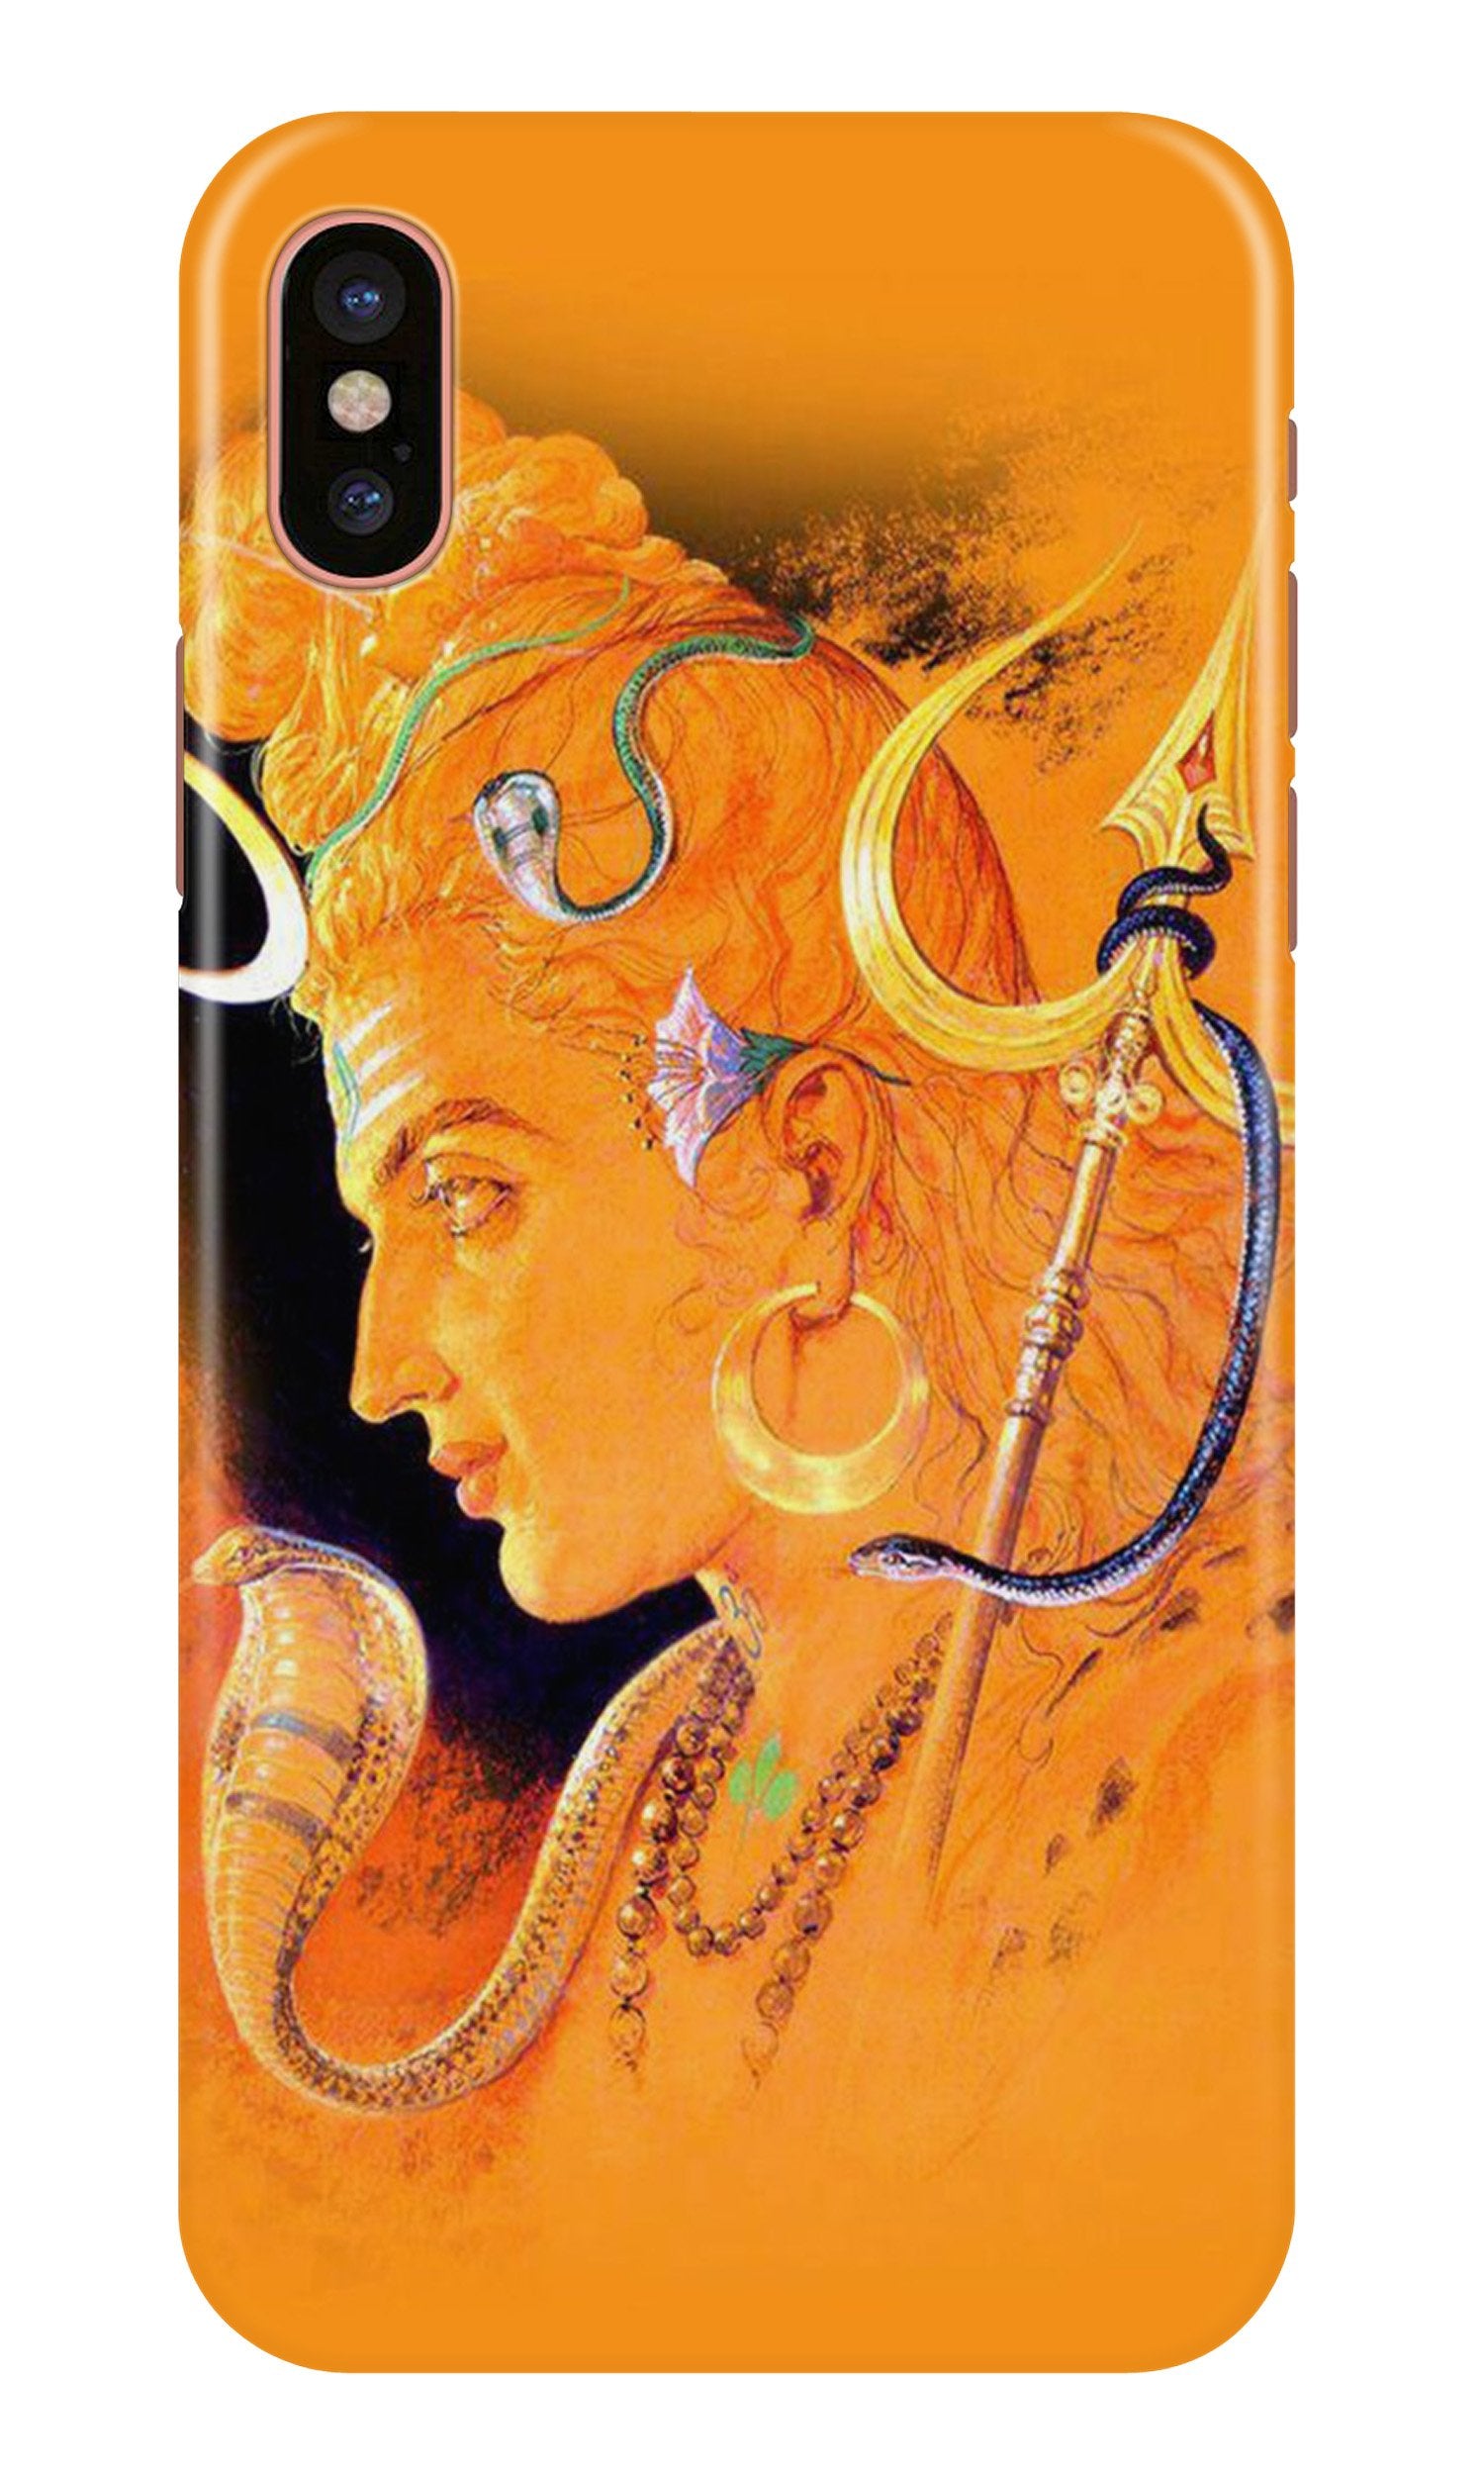 Lord Shiva Case for iPhone Xr (Design No. 293)